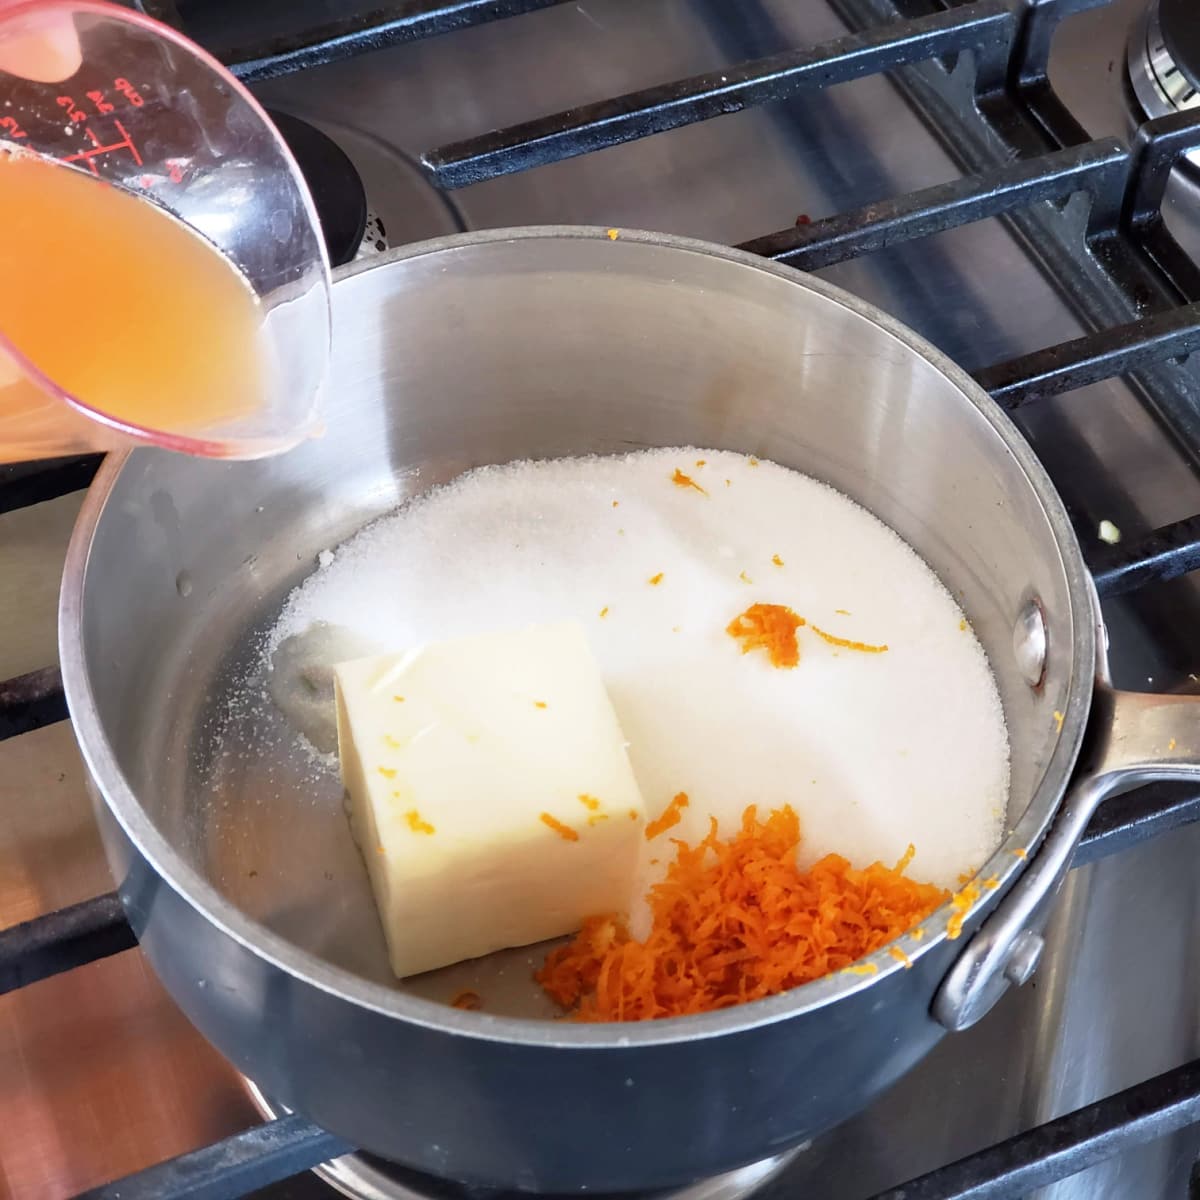 A hand pours orange juice from a measuring cup into a small silver sauce pan containing sugar, butter and orange zest